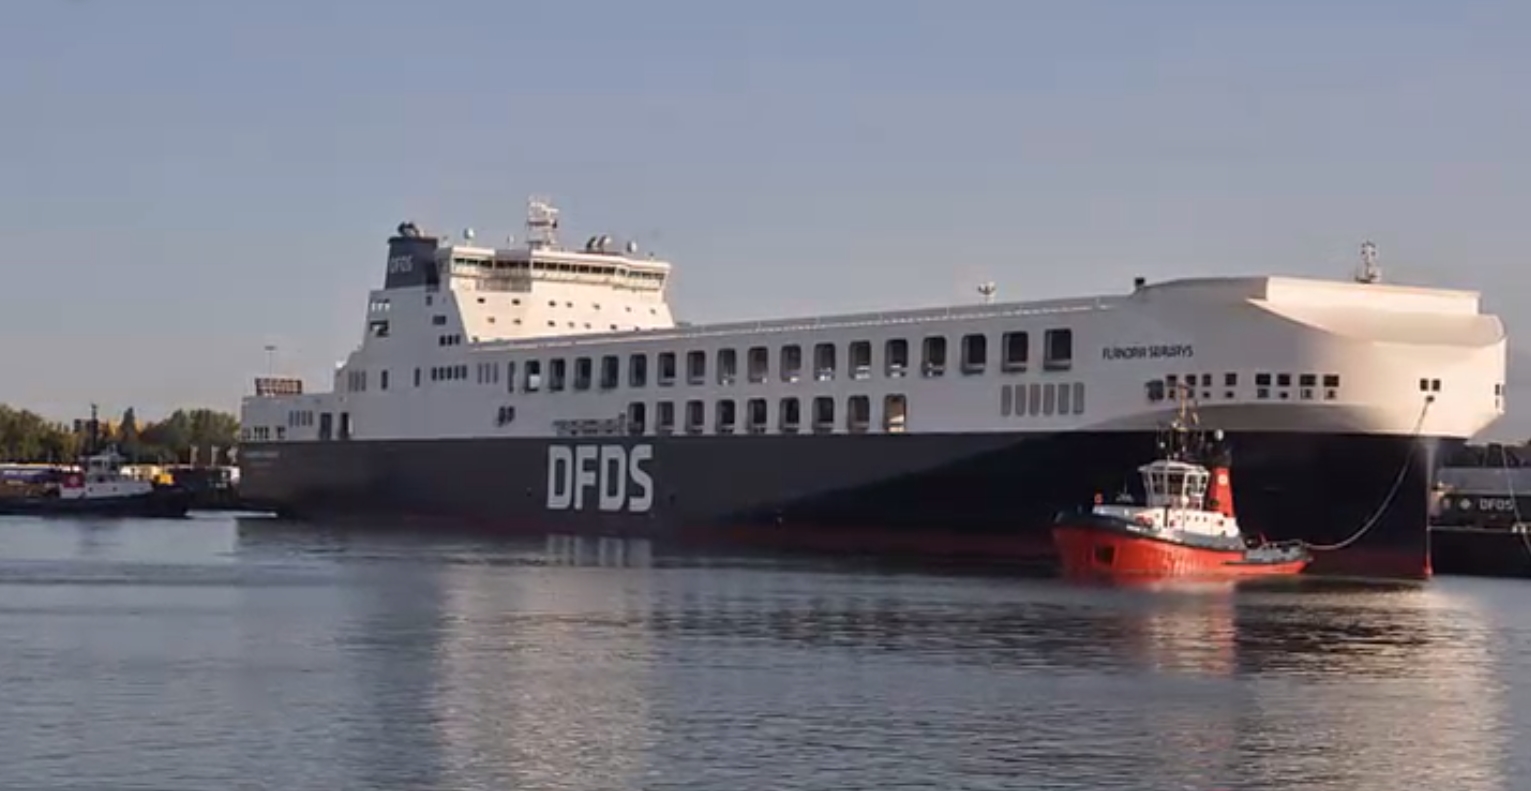 DFDS’ fifth mega freight ferry, Flandria Seaways, arrived in Vlaardingen following a successful maiden voyage